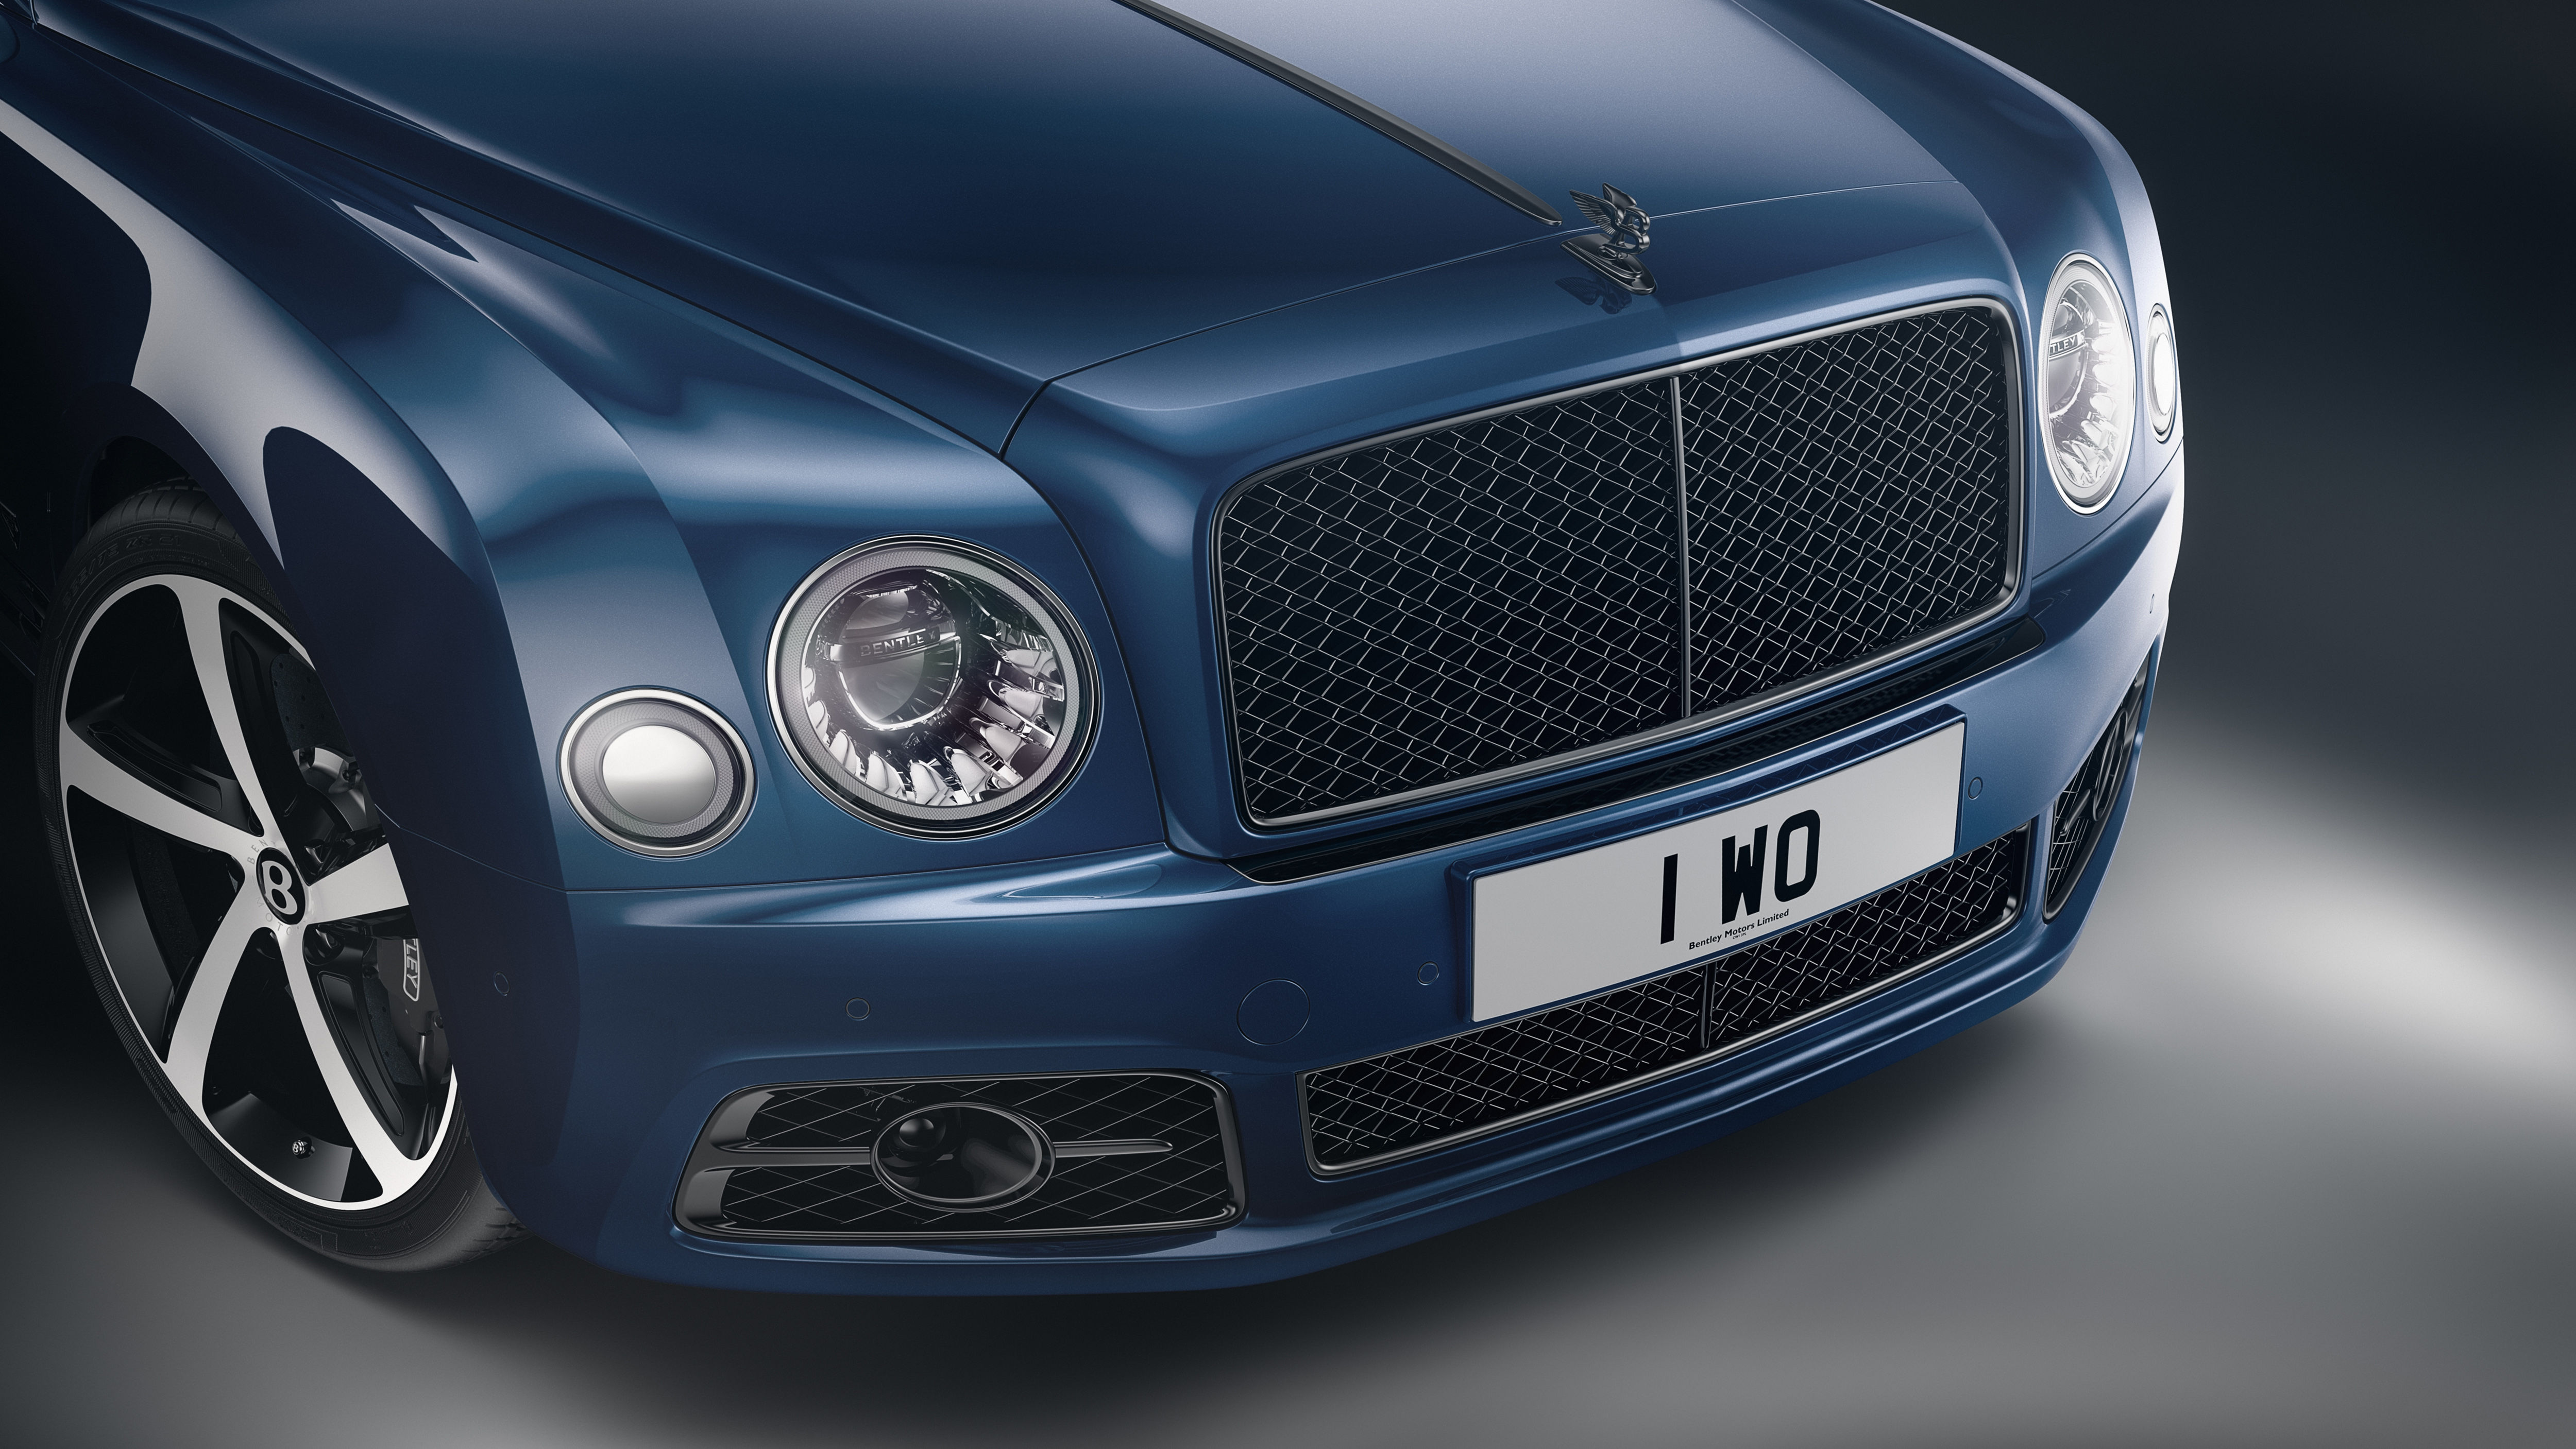 The face of the Mulsanne gets a blend of gloss black and bright chrome design elements. (Photo courtesy: Bentley)